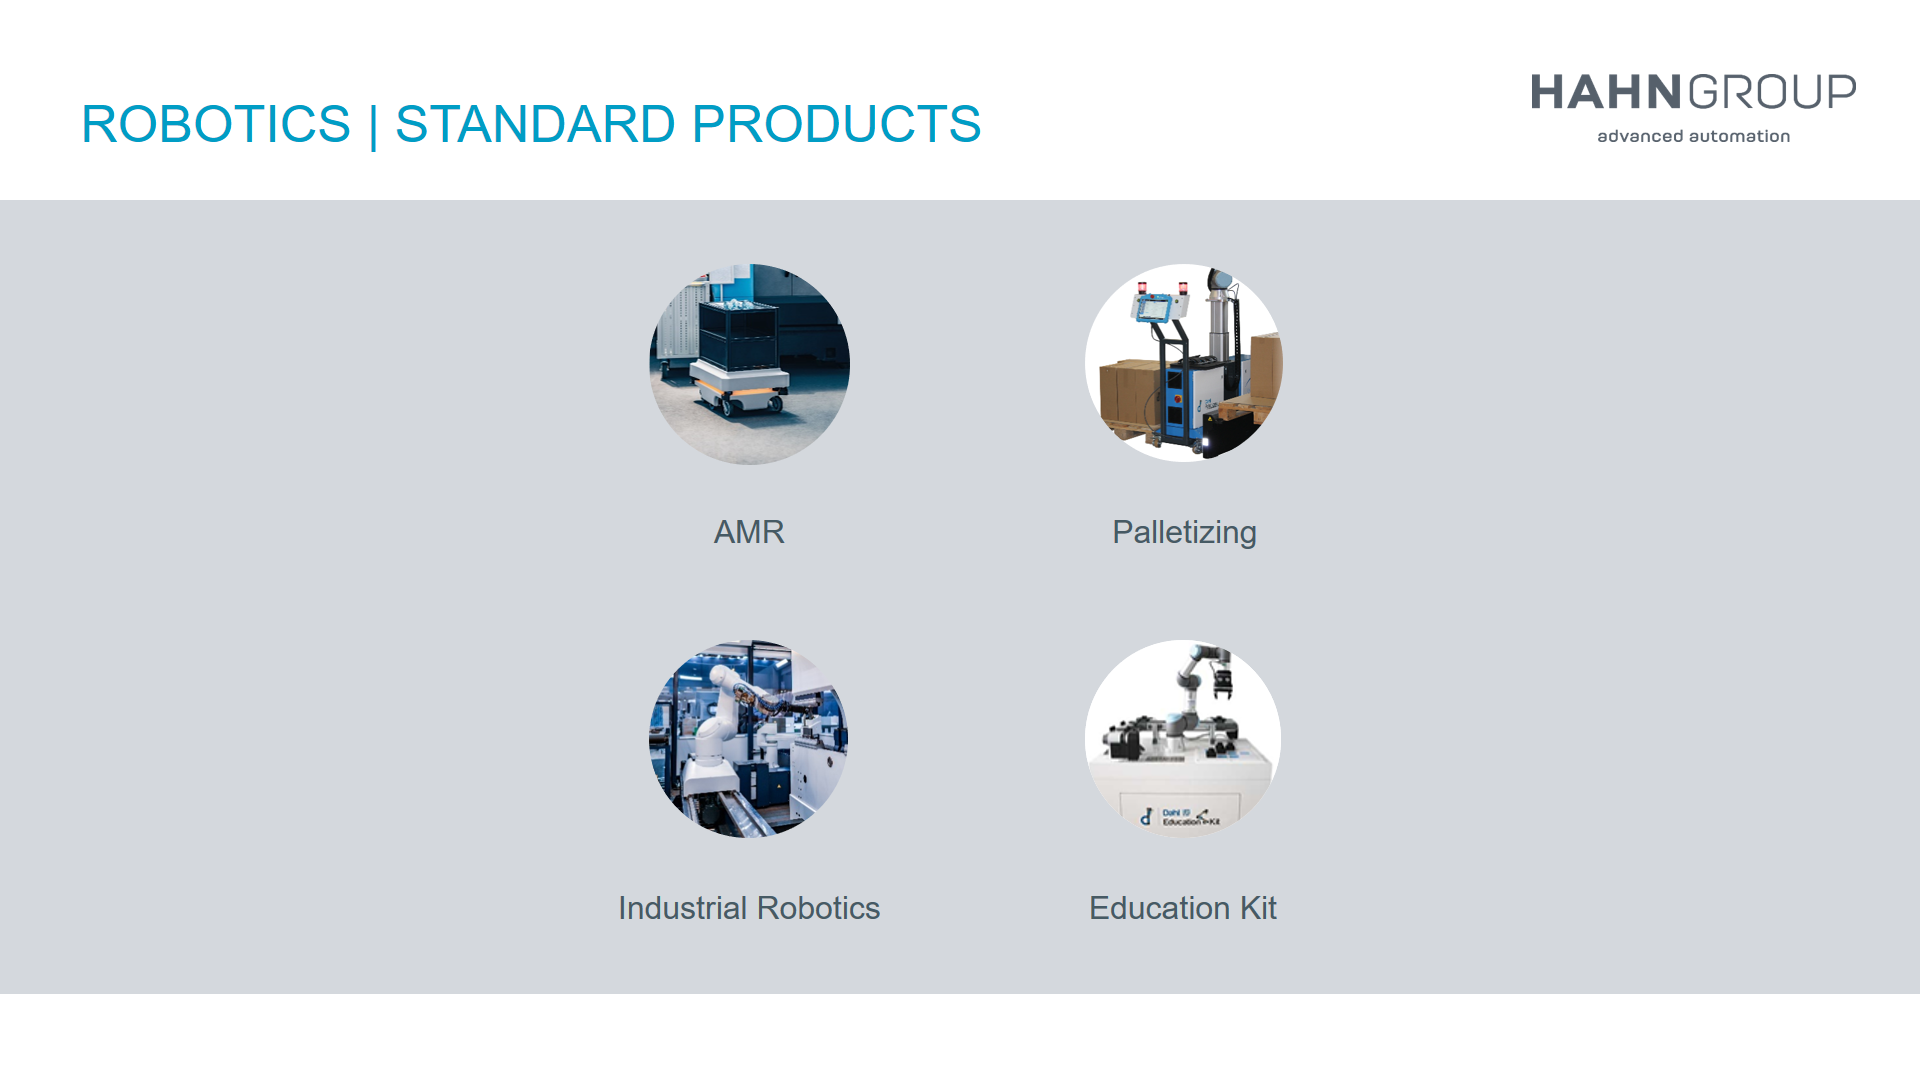 Standard Products of HAHN Group Robotics